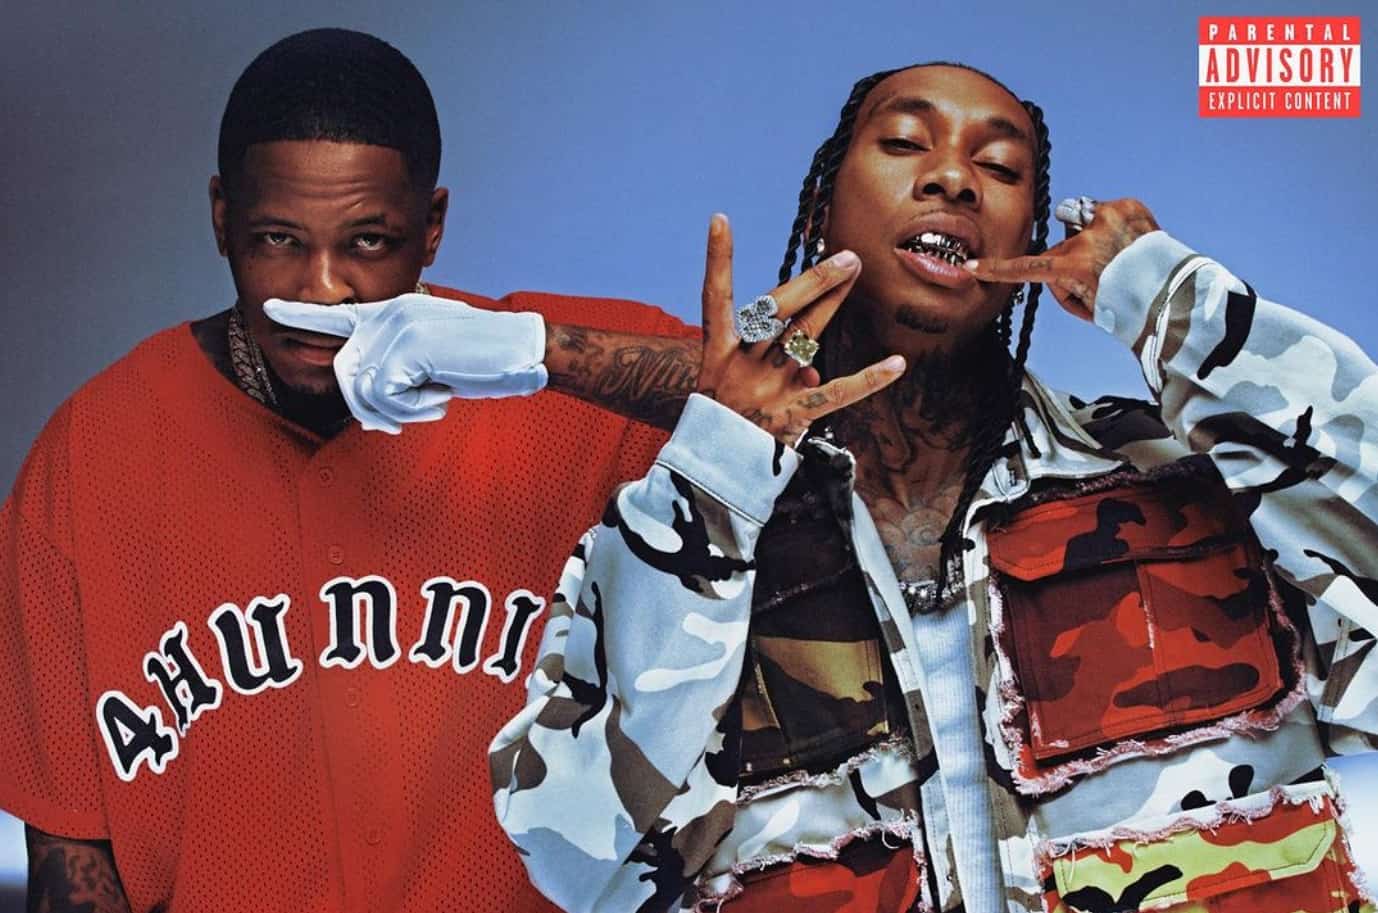 Tyga & YG Drops New Joint Album Hit Me When U Leave The Klub The Playlist